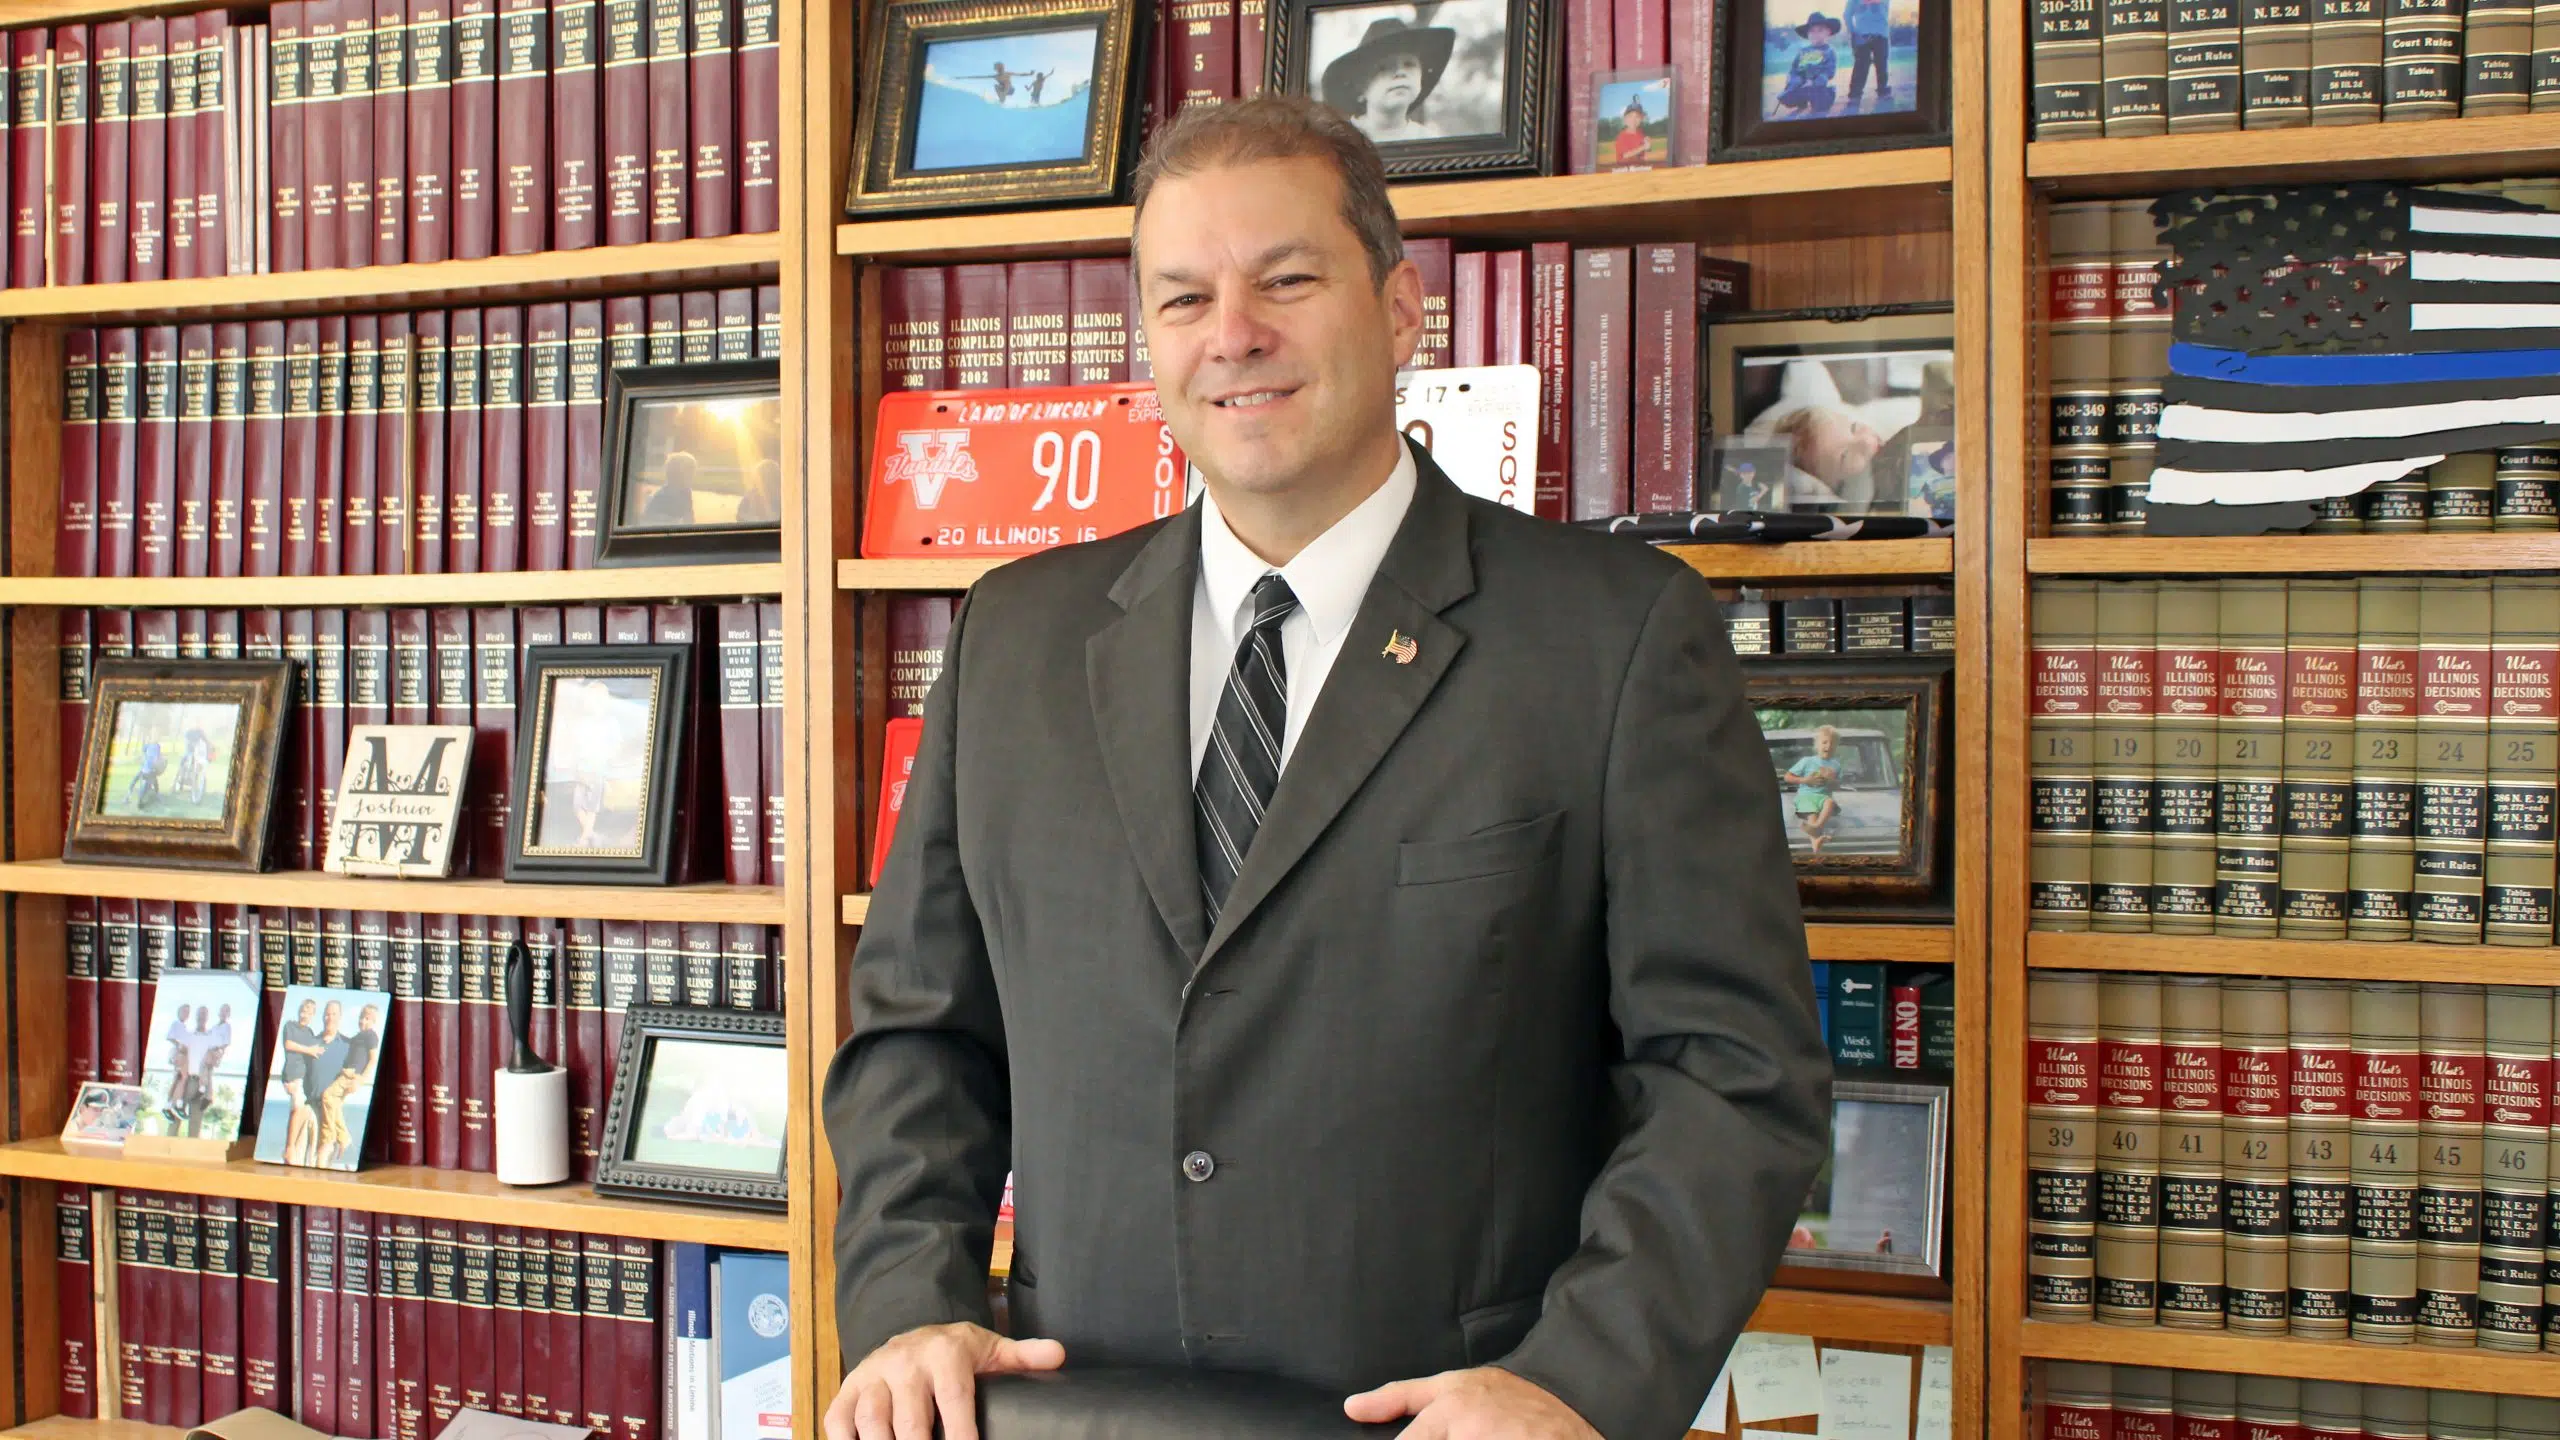 Fayette County State's Attorney talks about running for Fayette County Resident Circuit Judge